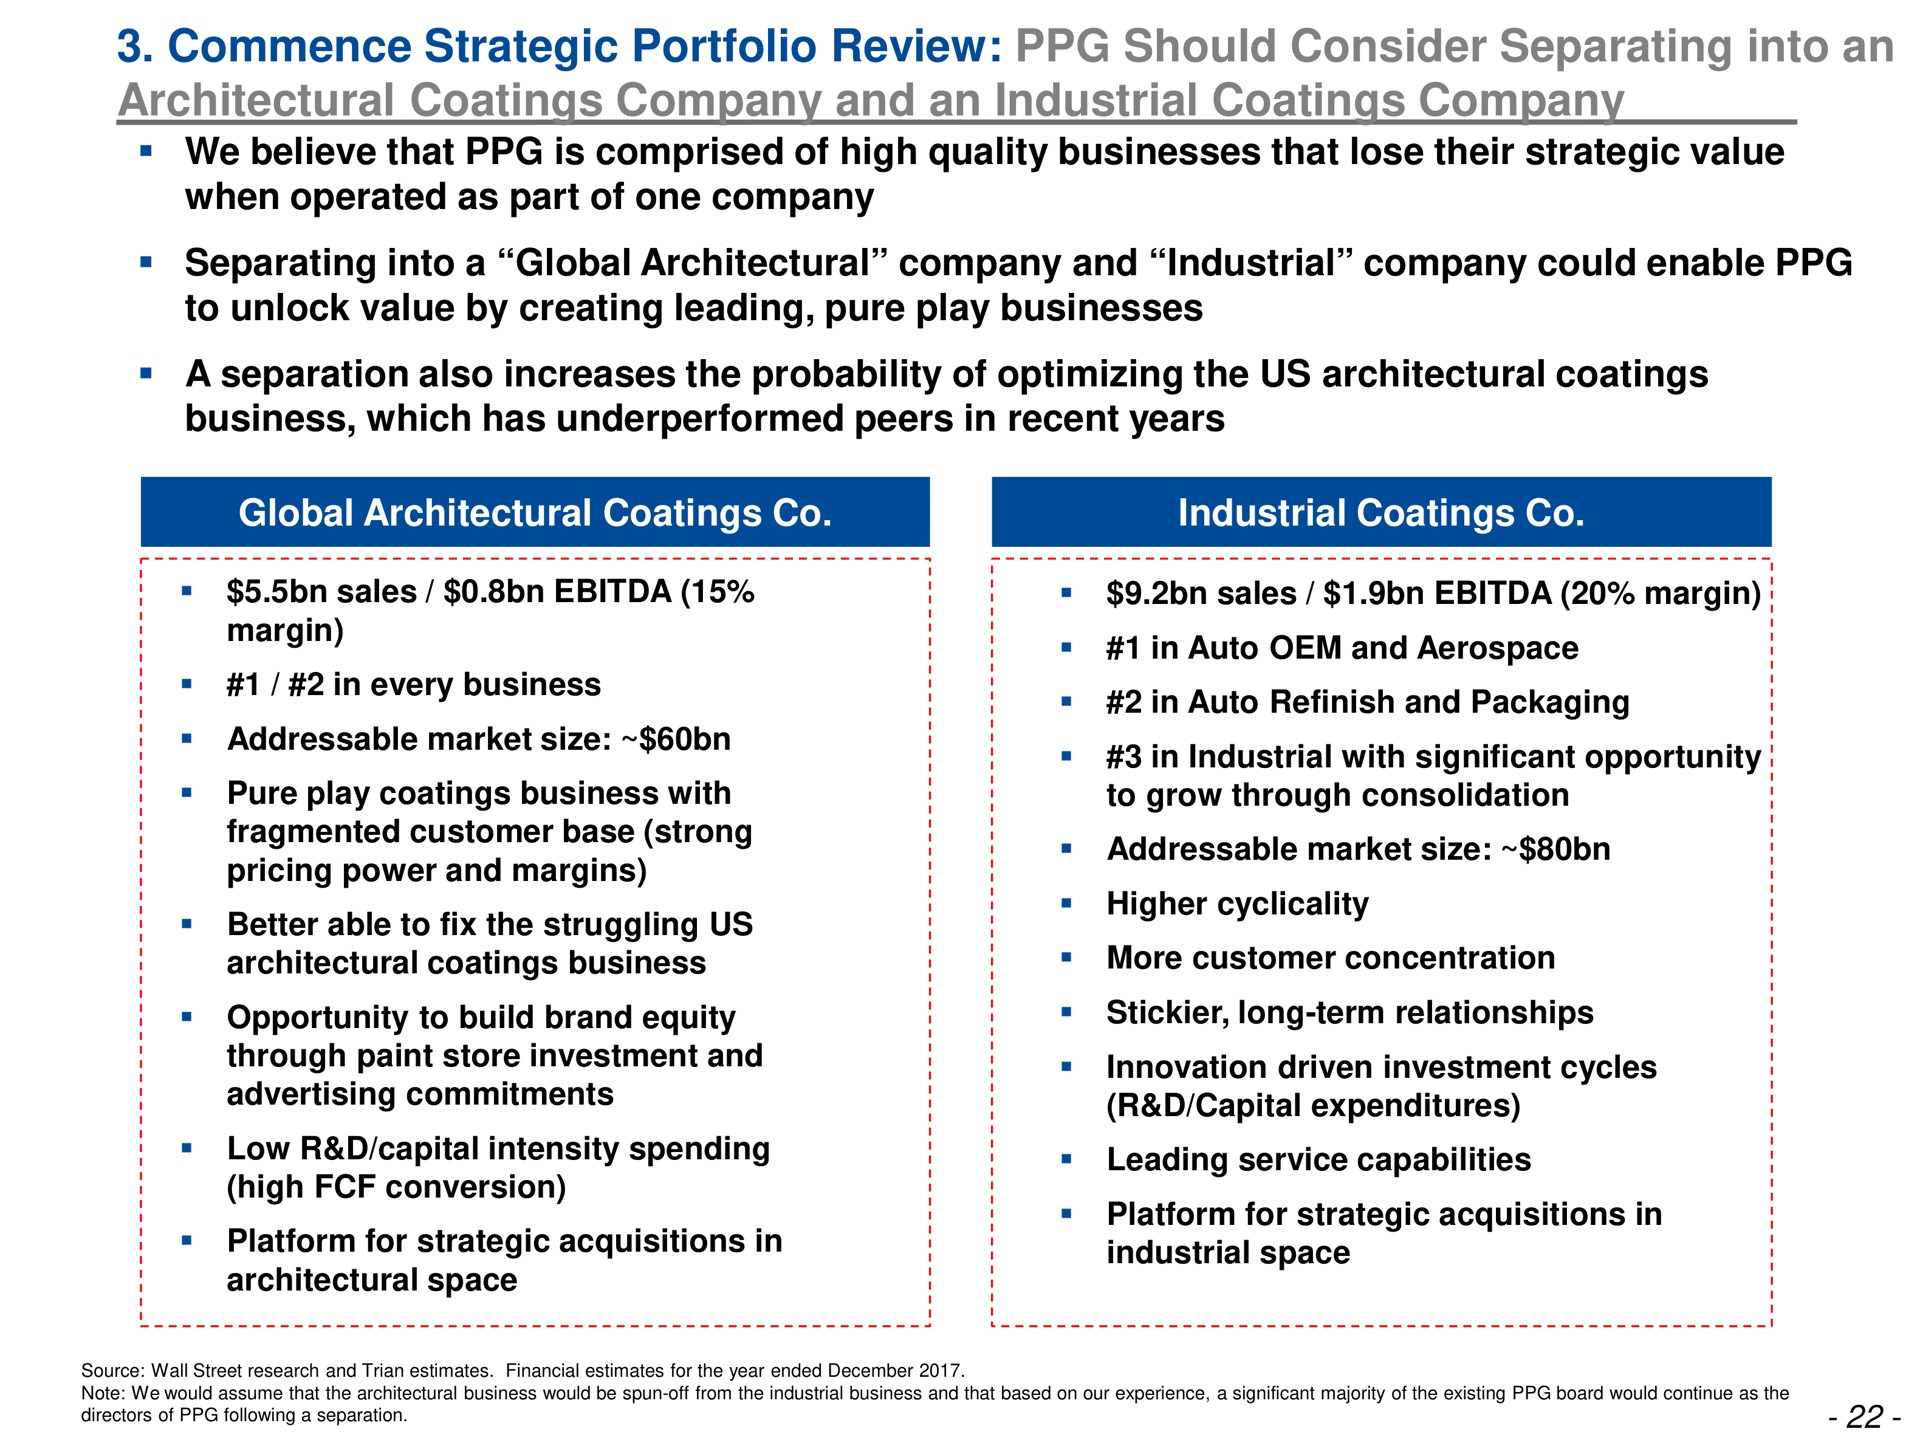 commence strategic portfolio review should consider separating into an architectural coatings company and an industrial coatings company | Trian Partners